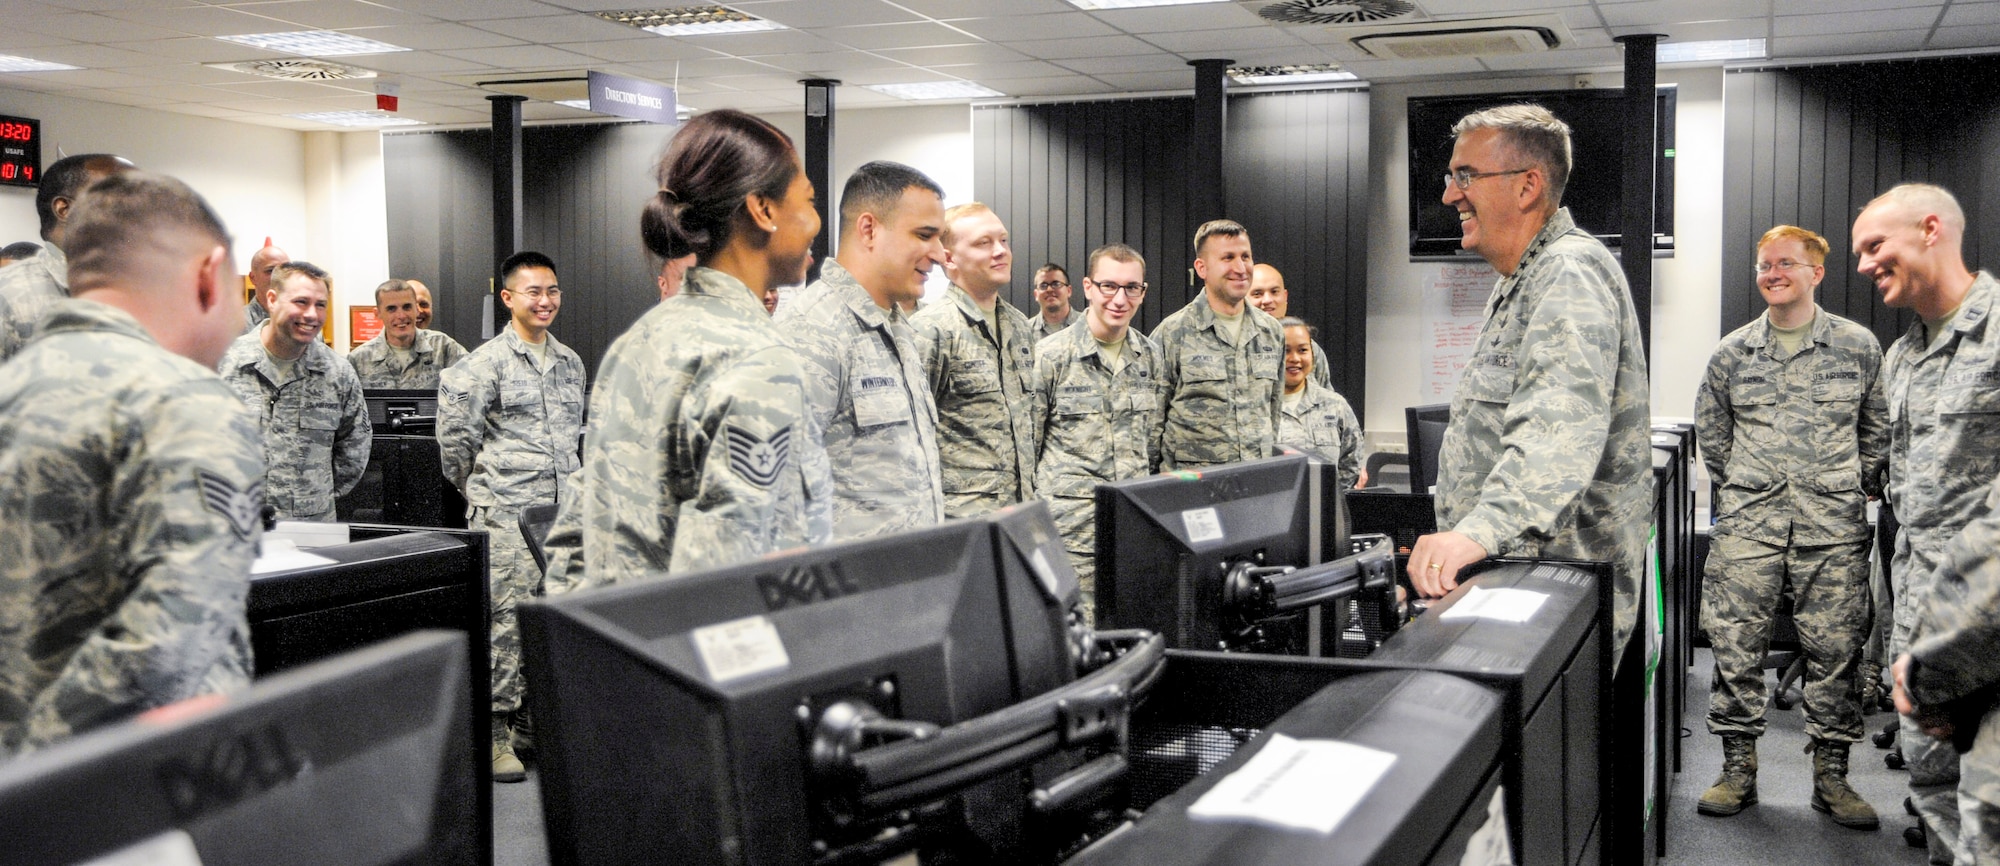 General John E. Hyten, Air Force Space Command commander, speaks with Airmen assigned to the 691st Cyberspace Operations Squadron at Ramstein Air Base, Germany, Oct. 4, 2016. The 691st COS was established in March 2016 with the deactivation of the 83rd Network Operations Squadron Detachment 4 and the 690th Network Support Squadron Detachment 1 under AFSPC. (U.S. Air Force photo by Staff Sgt. Timothy Moore)